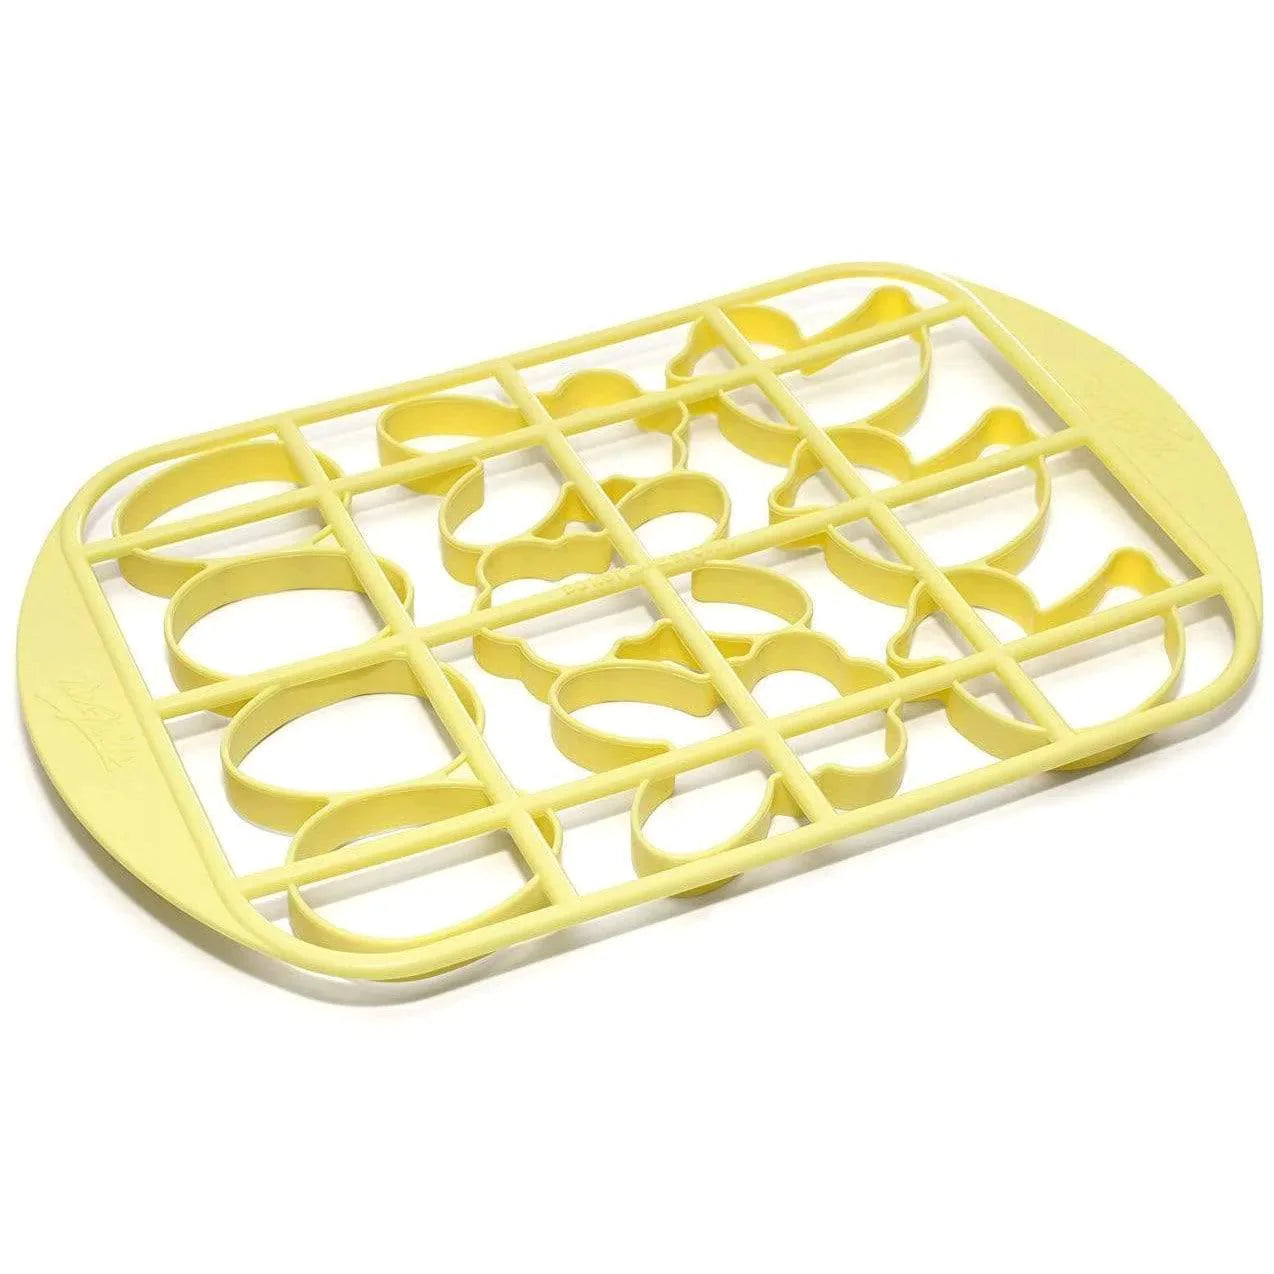 Mrs. Fields Easter Cookie Cutter Grid with Egg, Bunny and Chick Pattern (133)